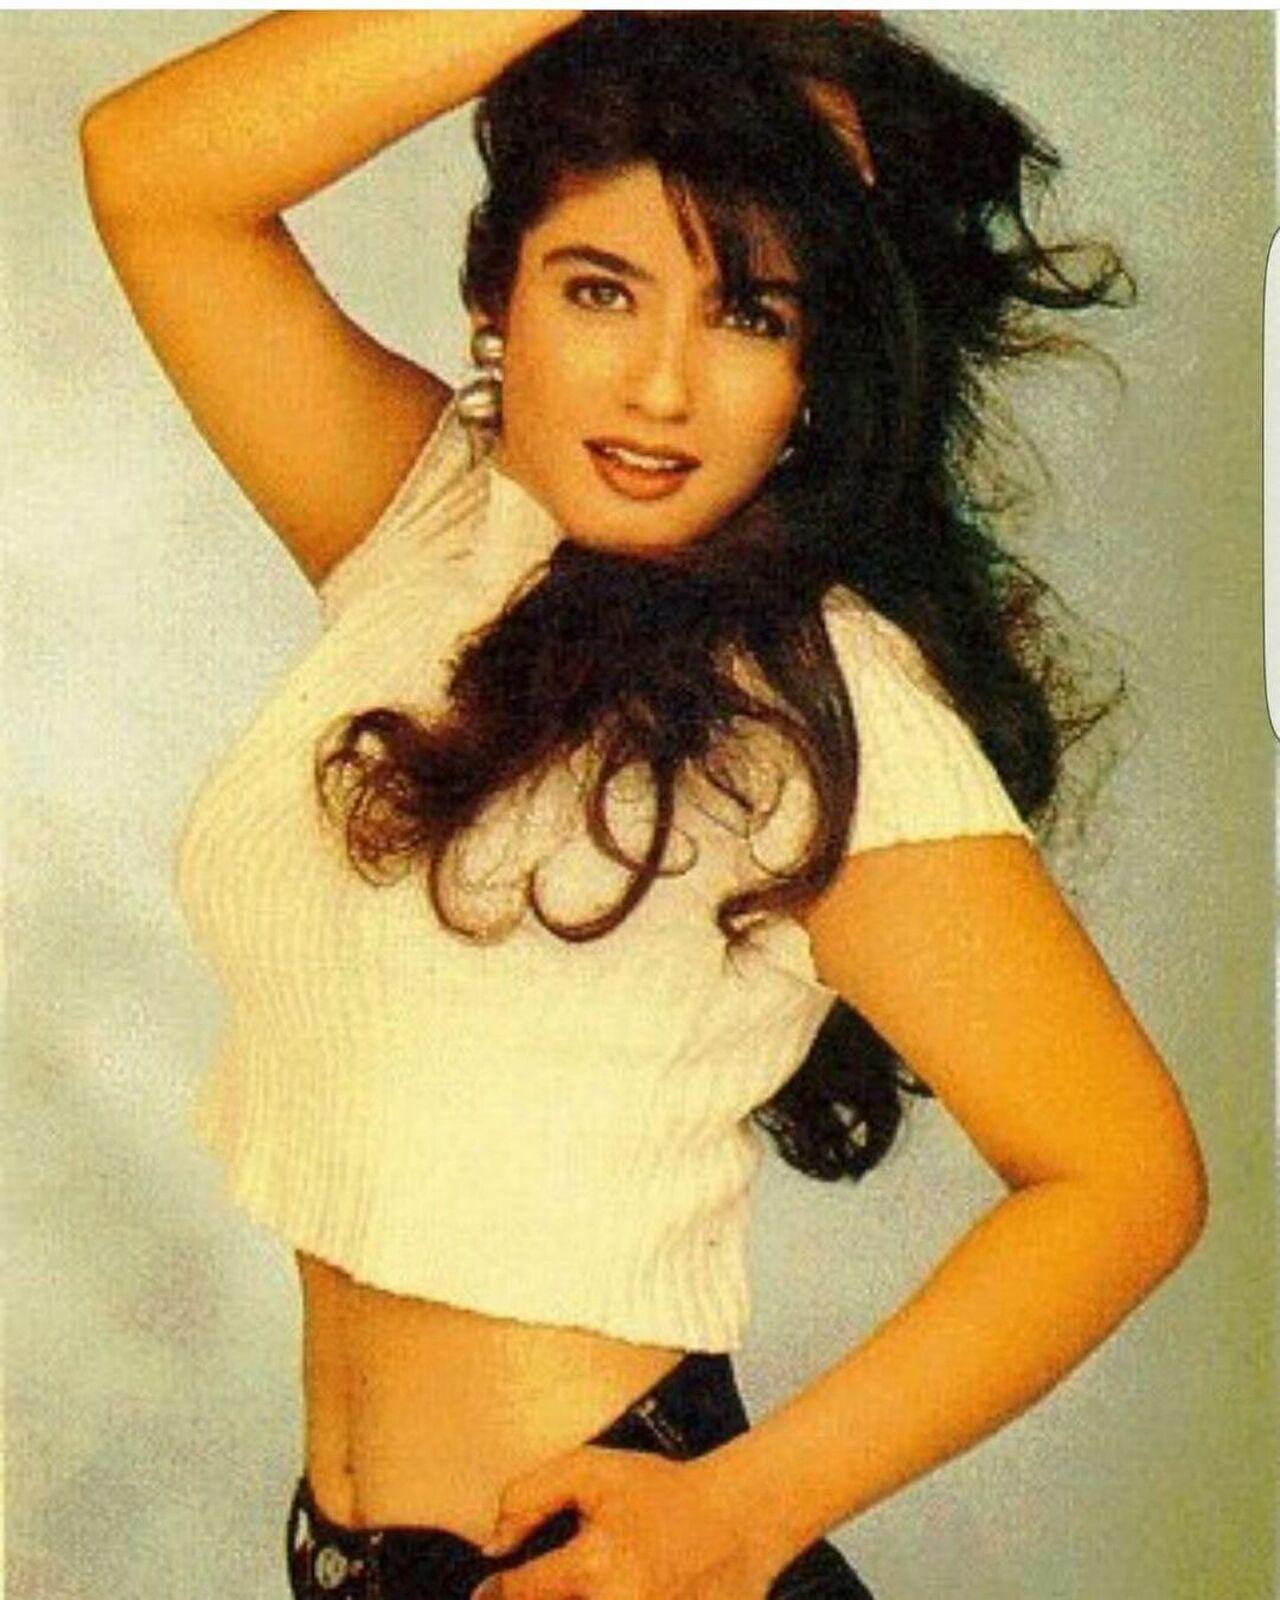 Raveena Tandon was also too happy to hop on to the Me At 21 trend as she shared multiple pictures of herself from the time she was younger